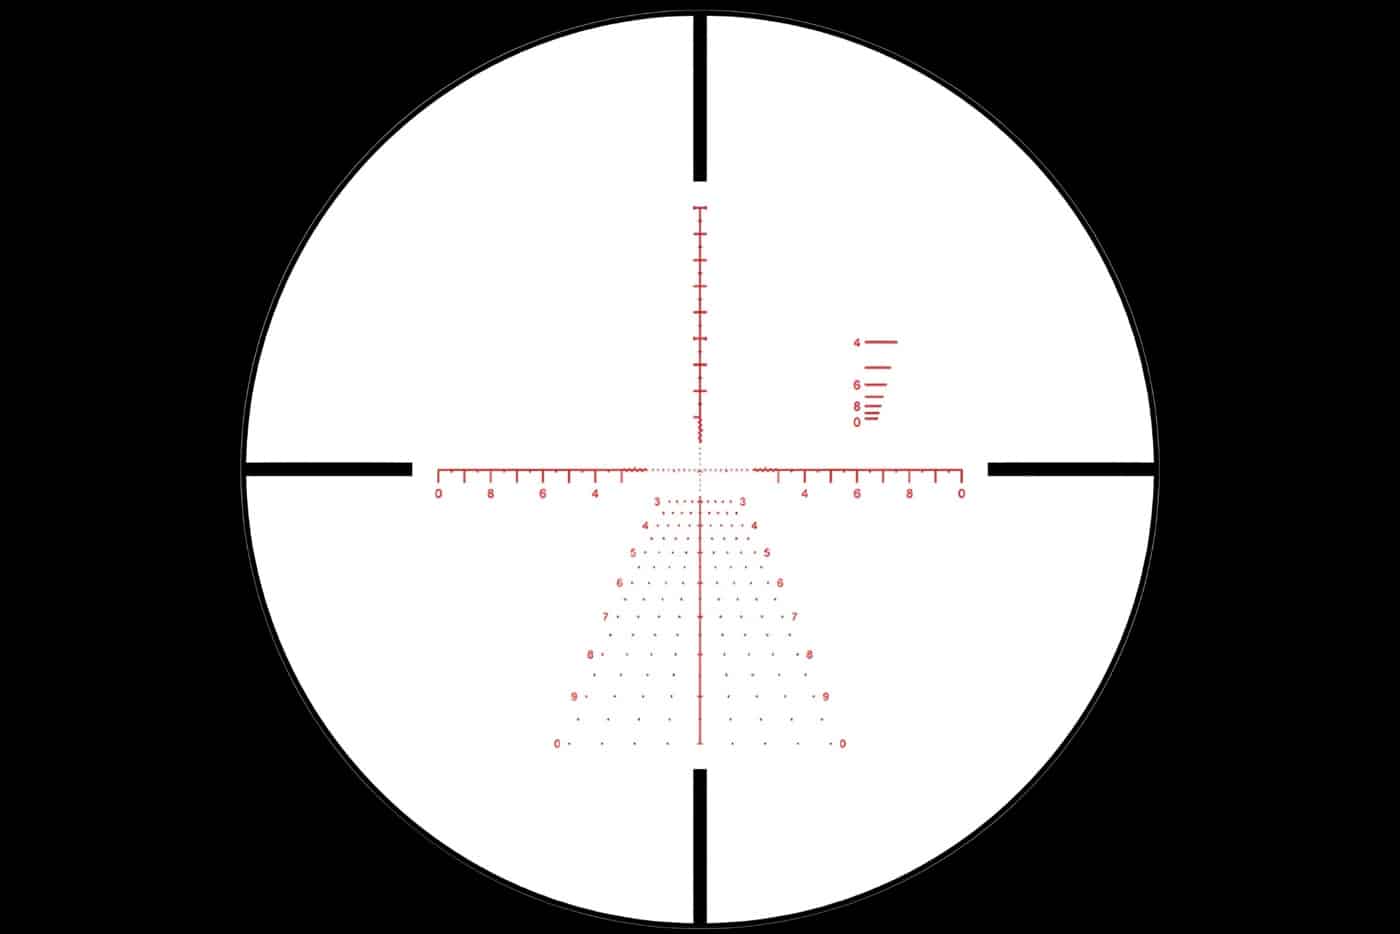 In this image, we see the reticle used in this telescopic sight. The first focal plane ACSS reticle adjusts with the magnification. It uses illumination that offers good brightness in all lighting conditions. For optical performance, it is excellent across all of the 3-18 times magnification - especially at 18x.  